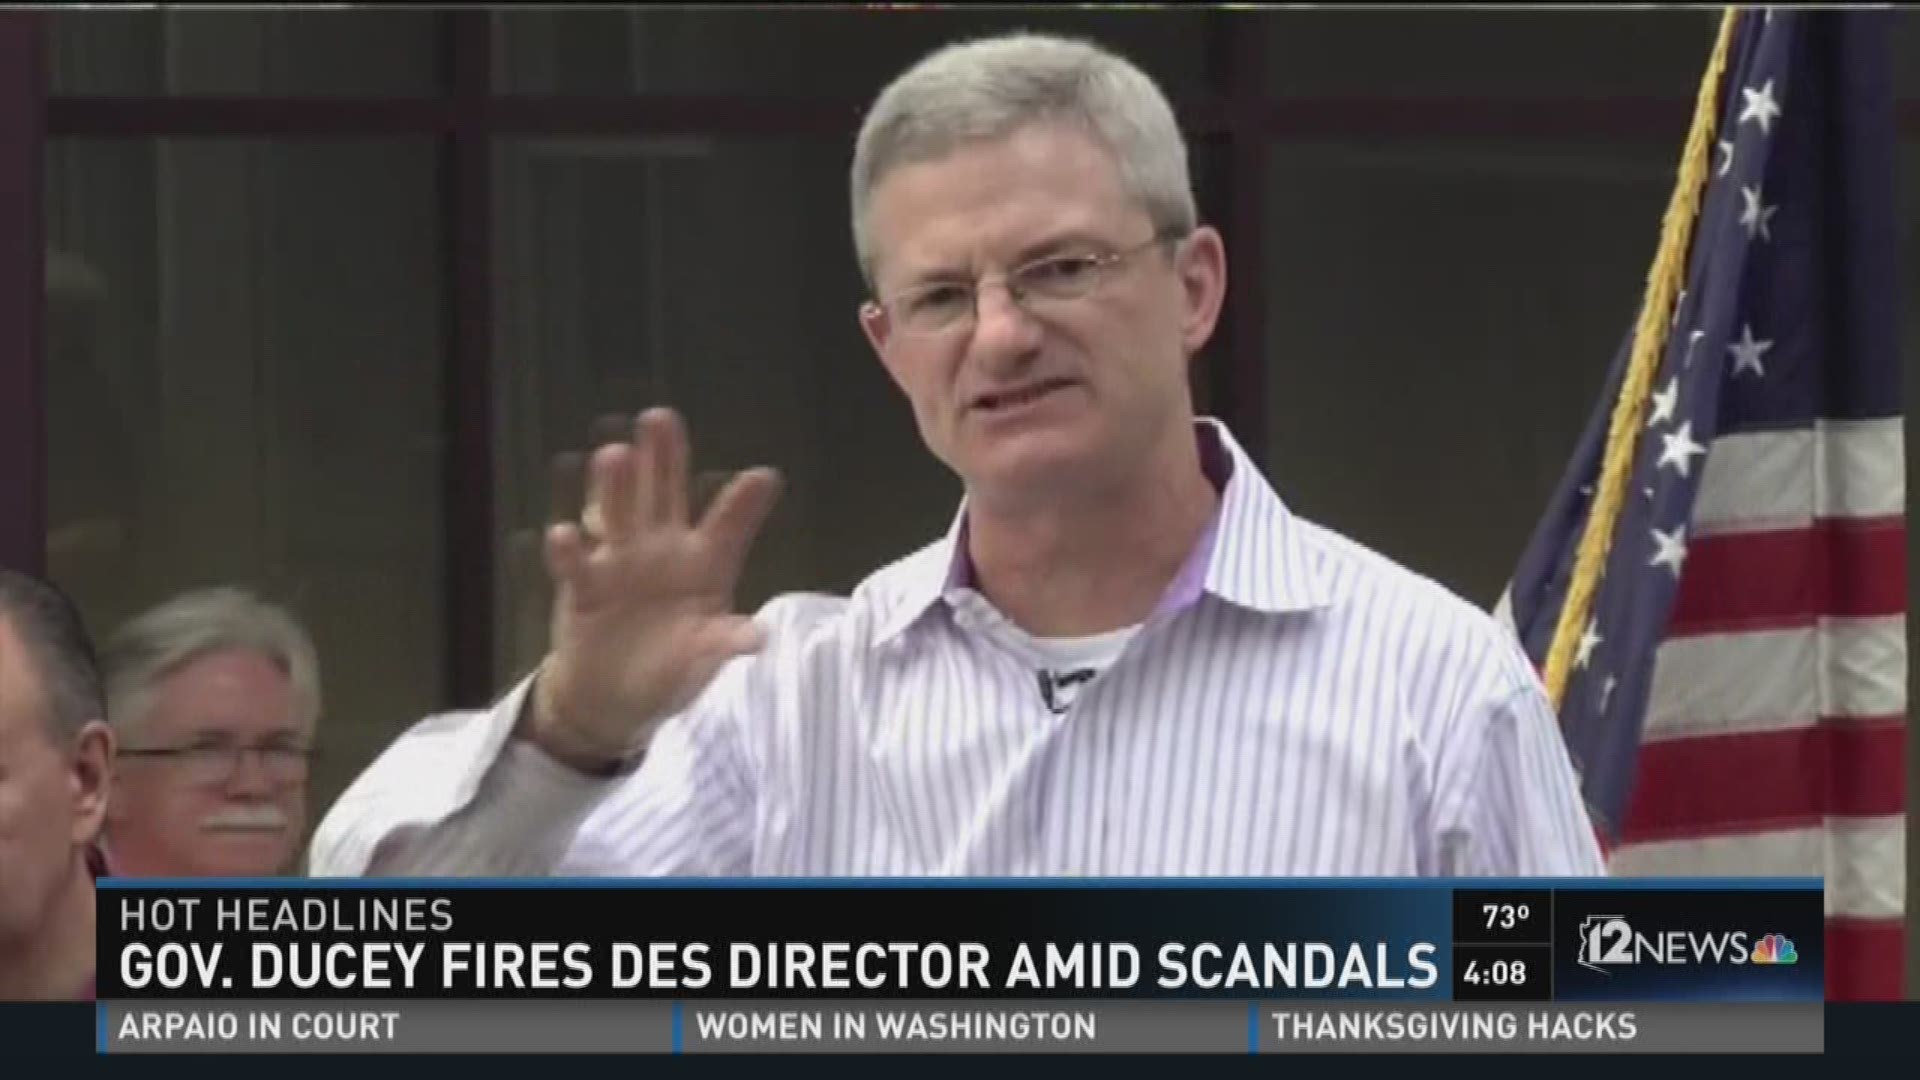 DES Director Tim Jeffries fired amid accusations.